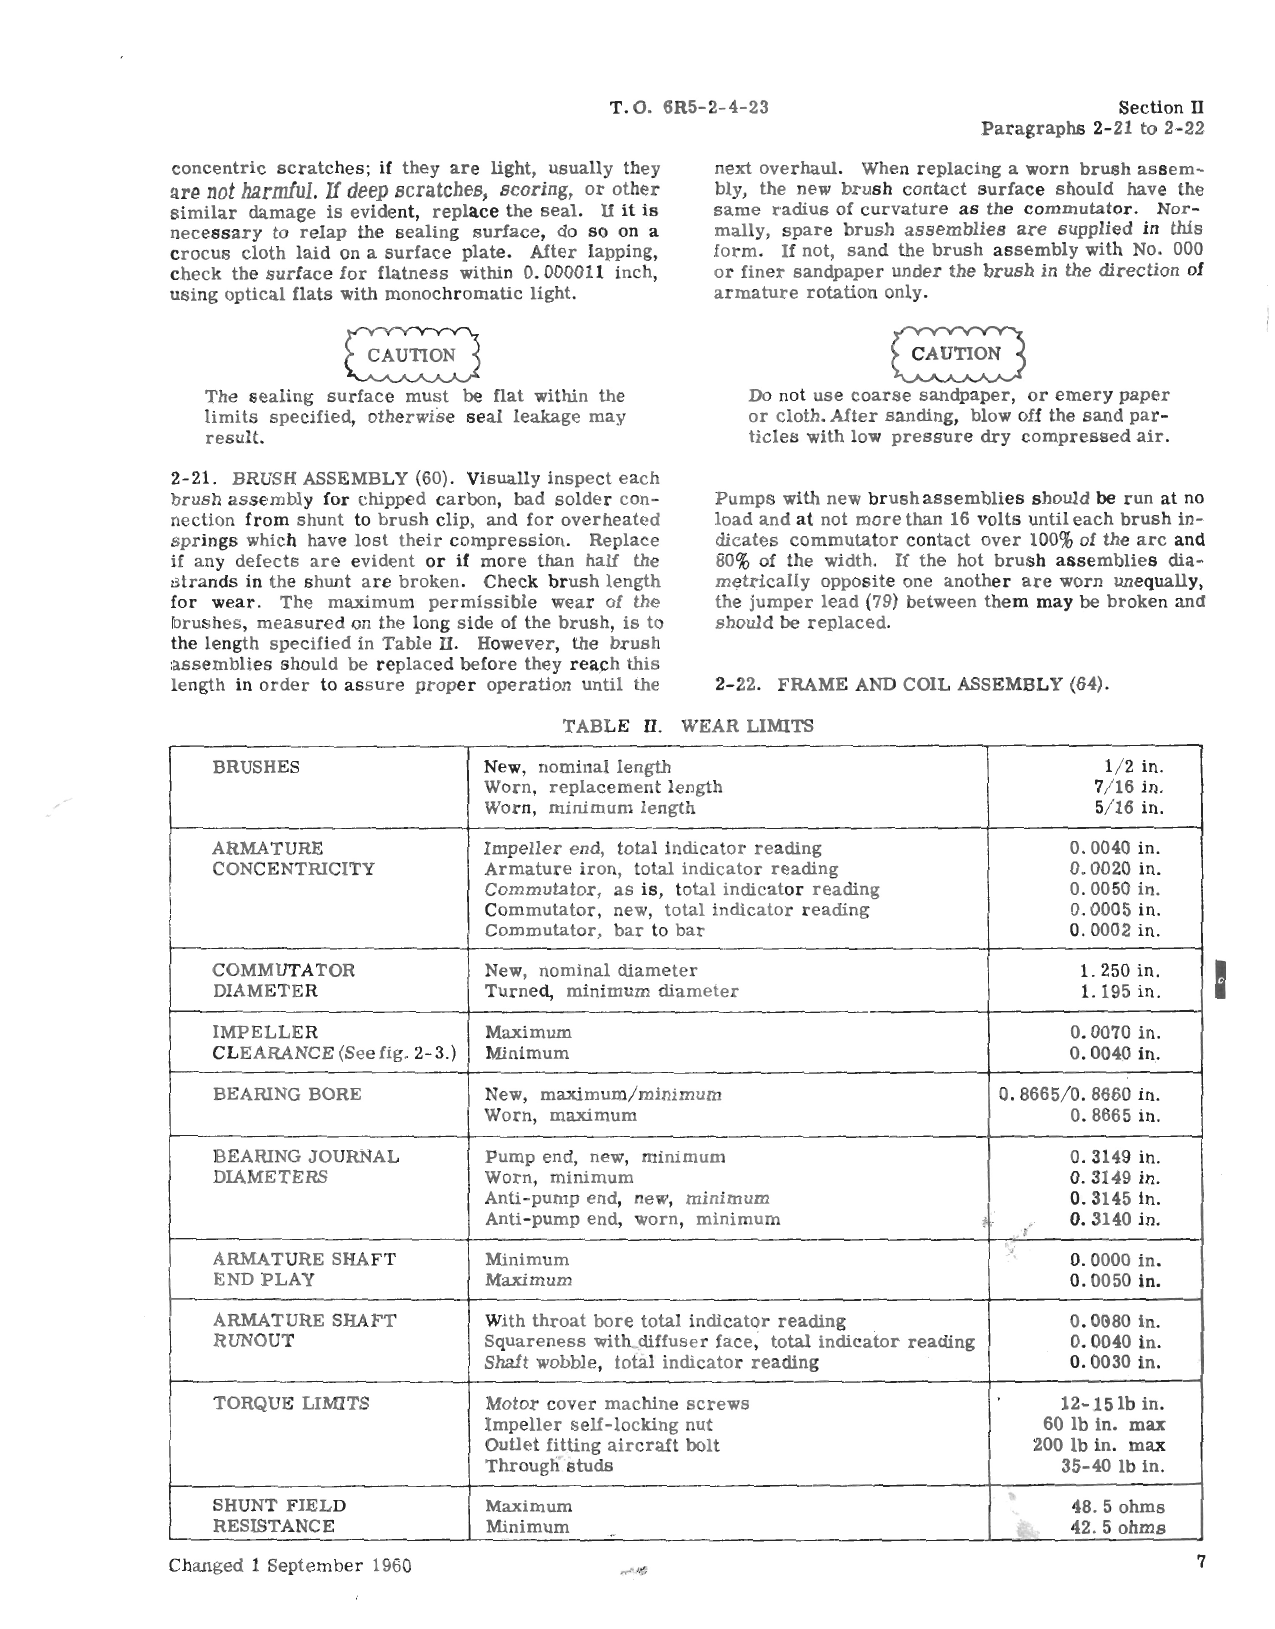 Sample page 9 from AirCorps Library document: Overhaul Instructions for Submerged Fuel Booster Pumps - Types B-5B, B-5C, B-18, B-19 and B-25 